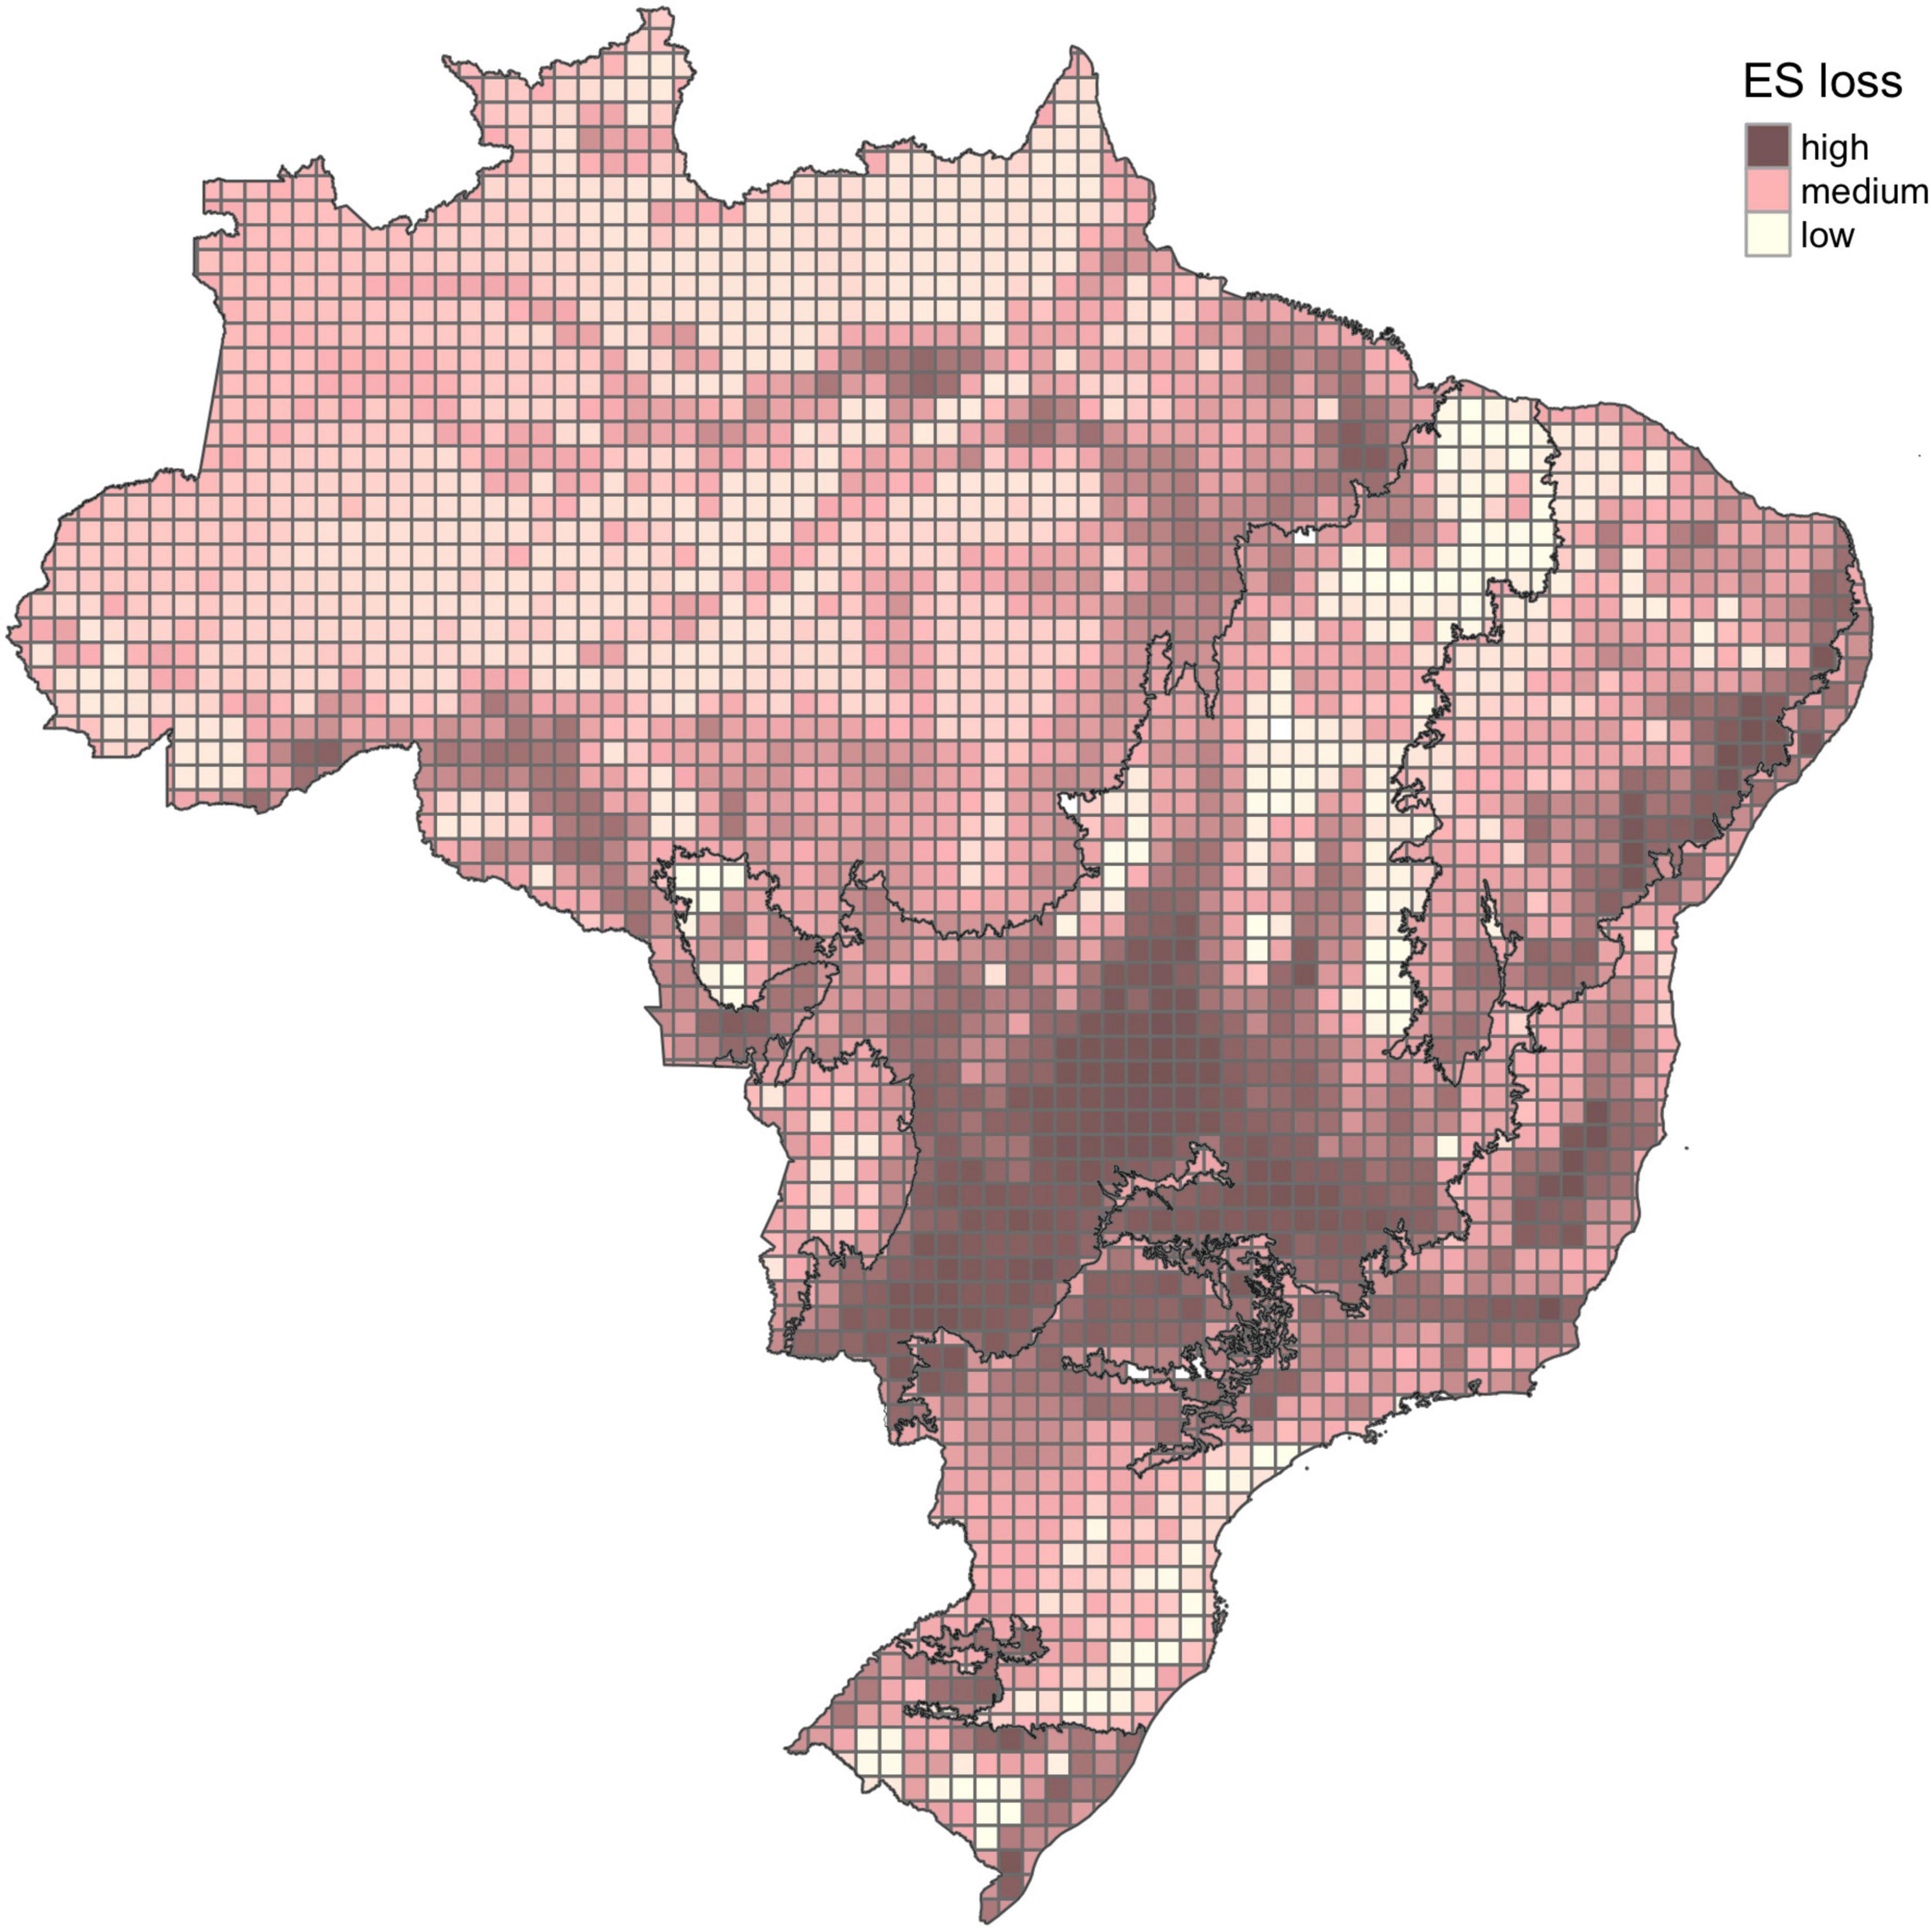 Frontiers  Ecosystems Services Provided by Bats Are at Risk in Brazil